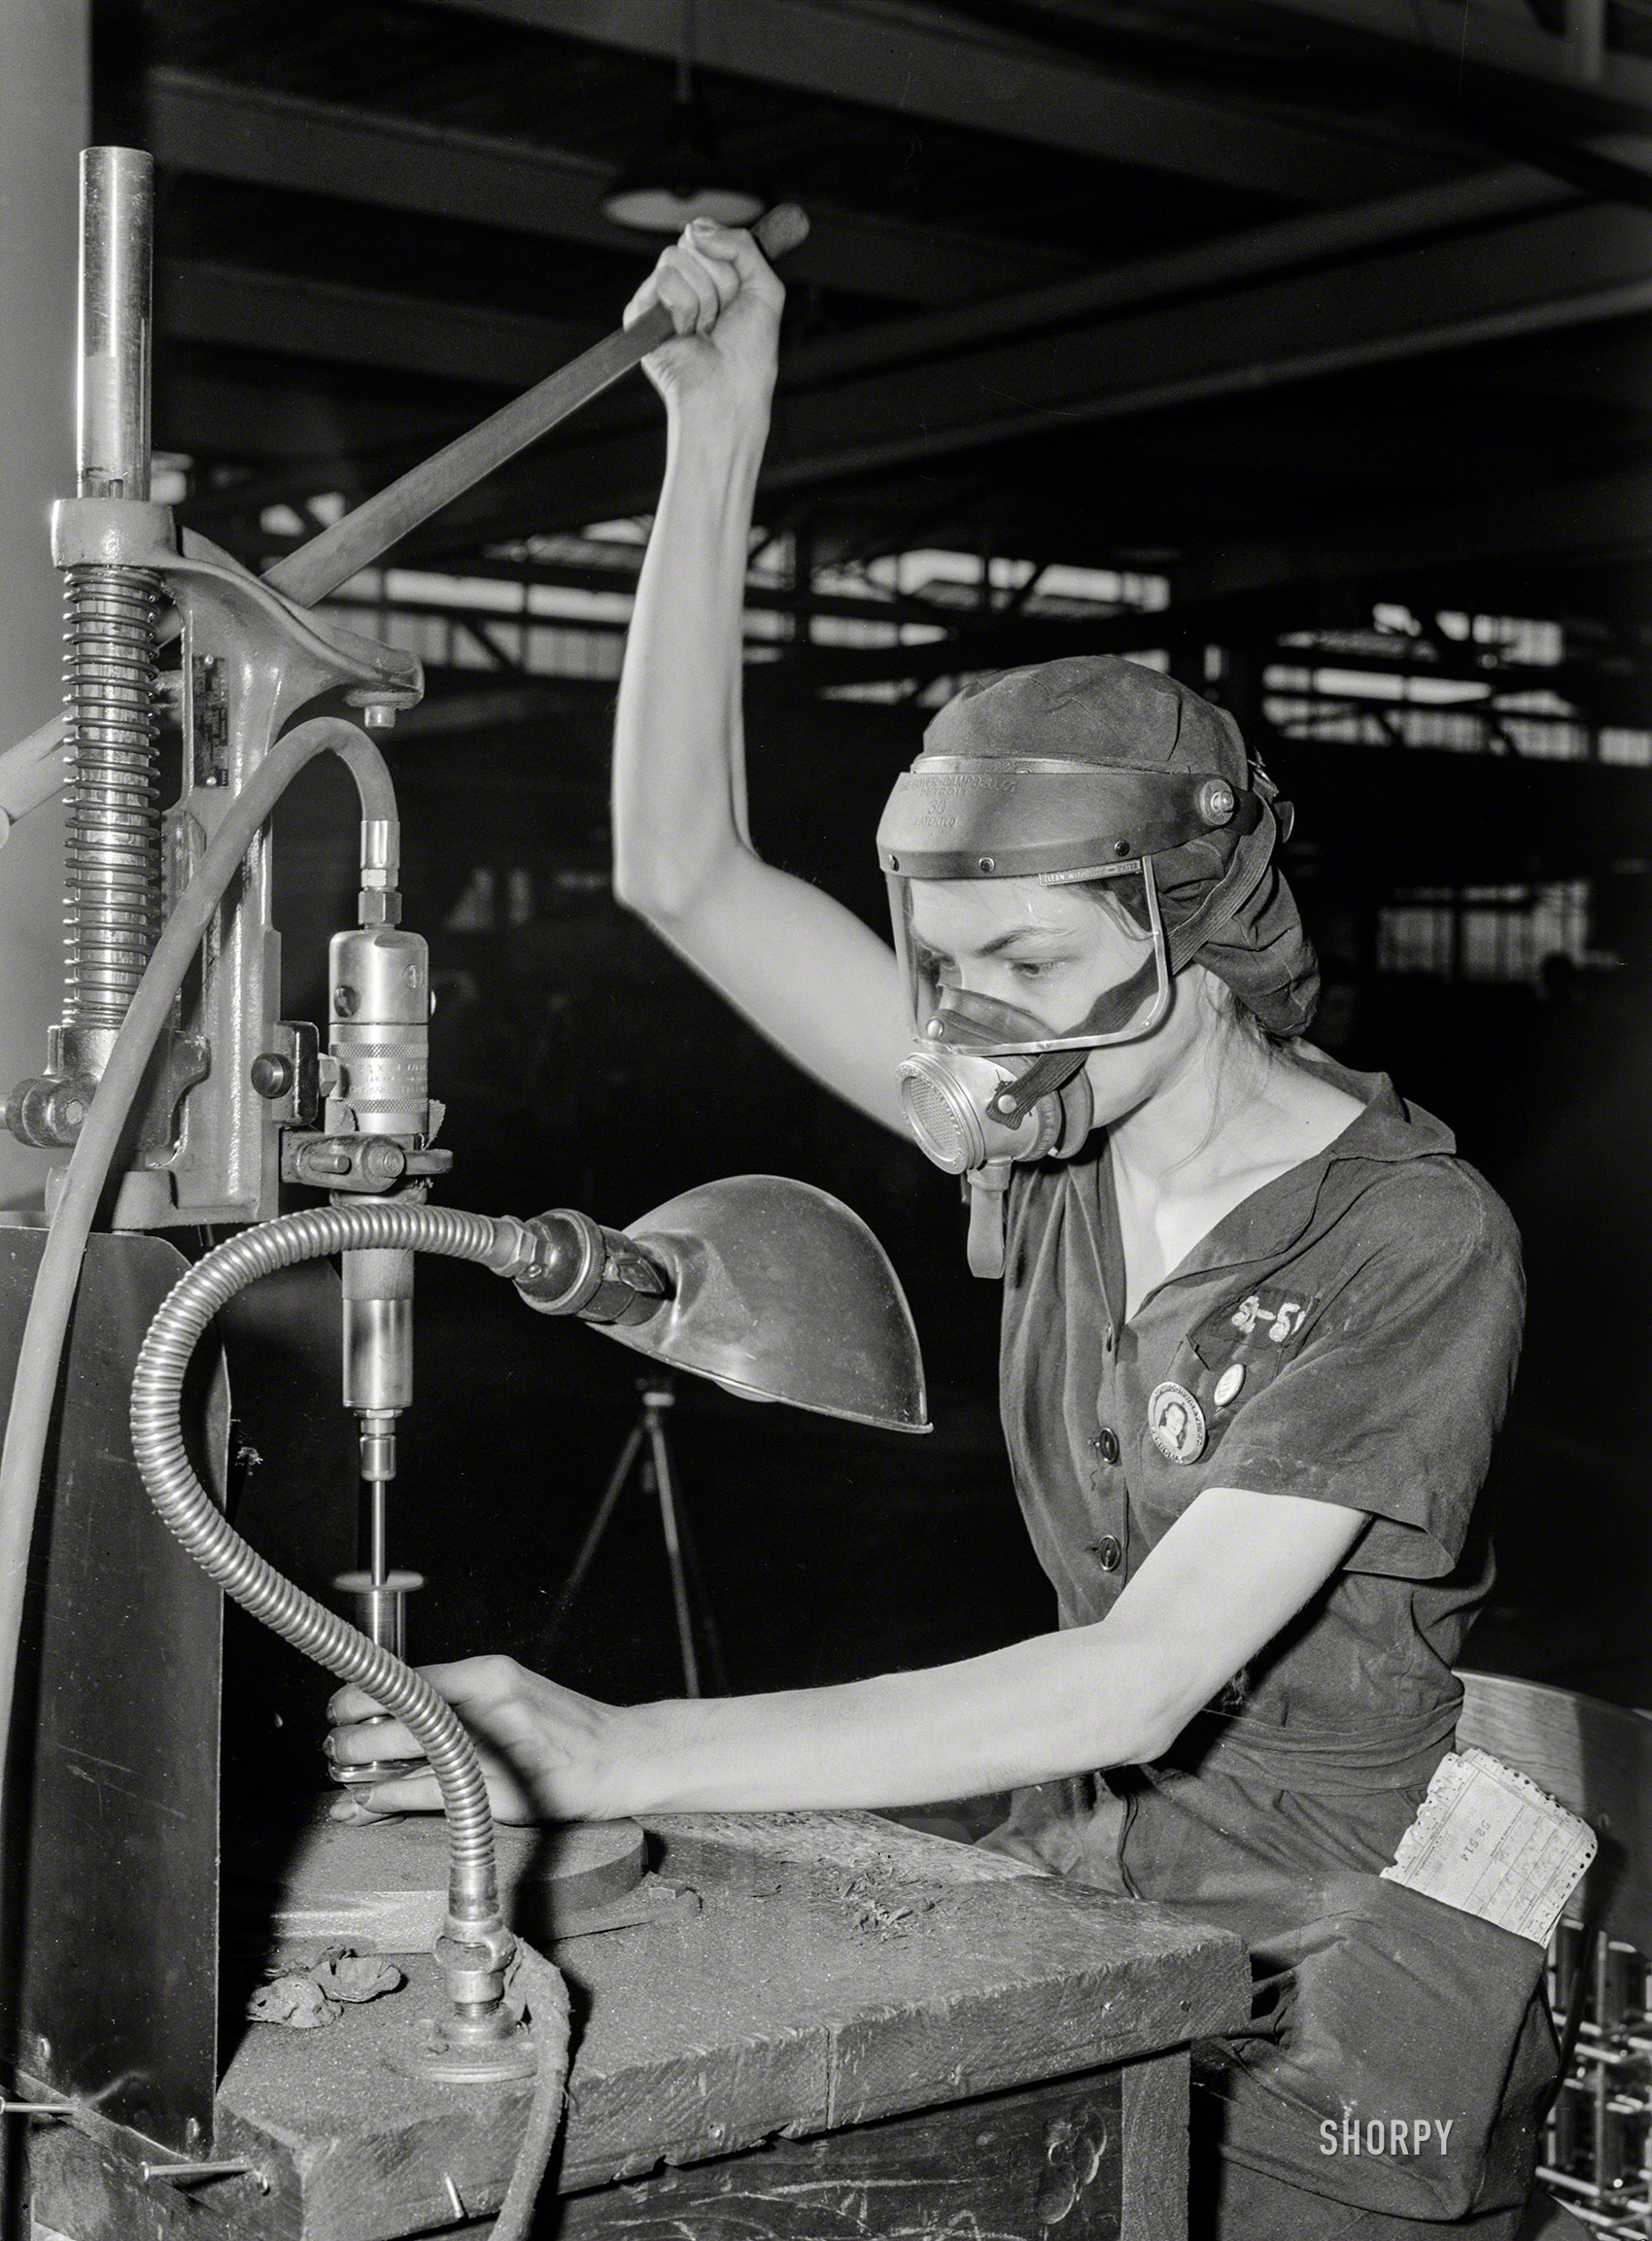 August 1942. "Women in industry. Aircraft motor workers. A million-dollar baby, not in terms of money but in her value to Uncle Sam, 21-year-old Eunice Hancock, erstwhile five-and-ten-cent store employee, operates a compressed-air grinder in a Midwest aircraft motor plant. With no previous experience, Eunice quickly mastered the techniques of her war job and today is turning out motor parts with speed and skill. Note protective mask and visor, two vital safety accessories." Photo by Ann Rosener for the Office of War Information. View full size.